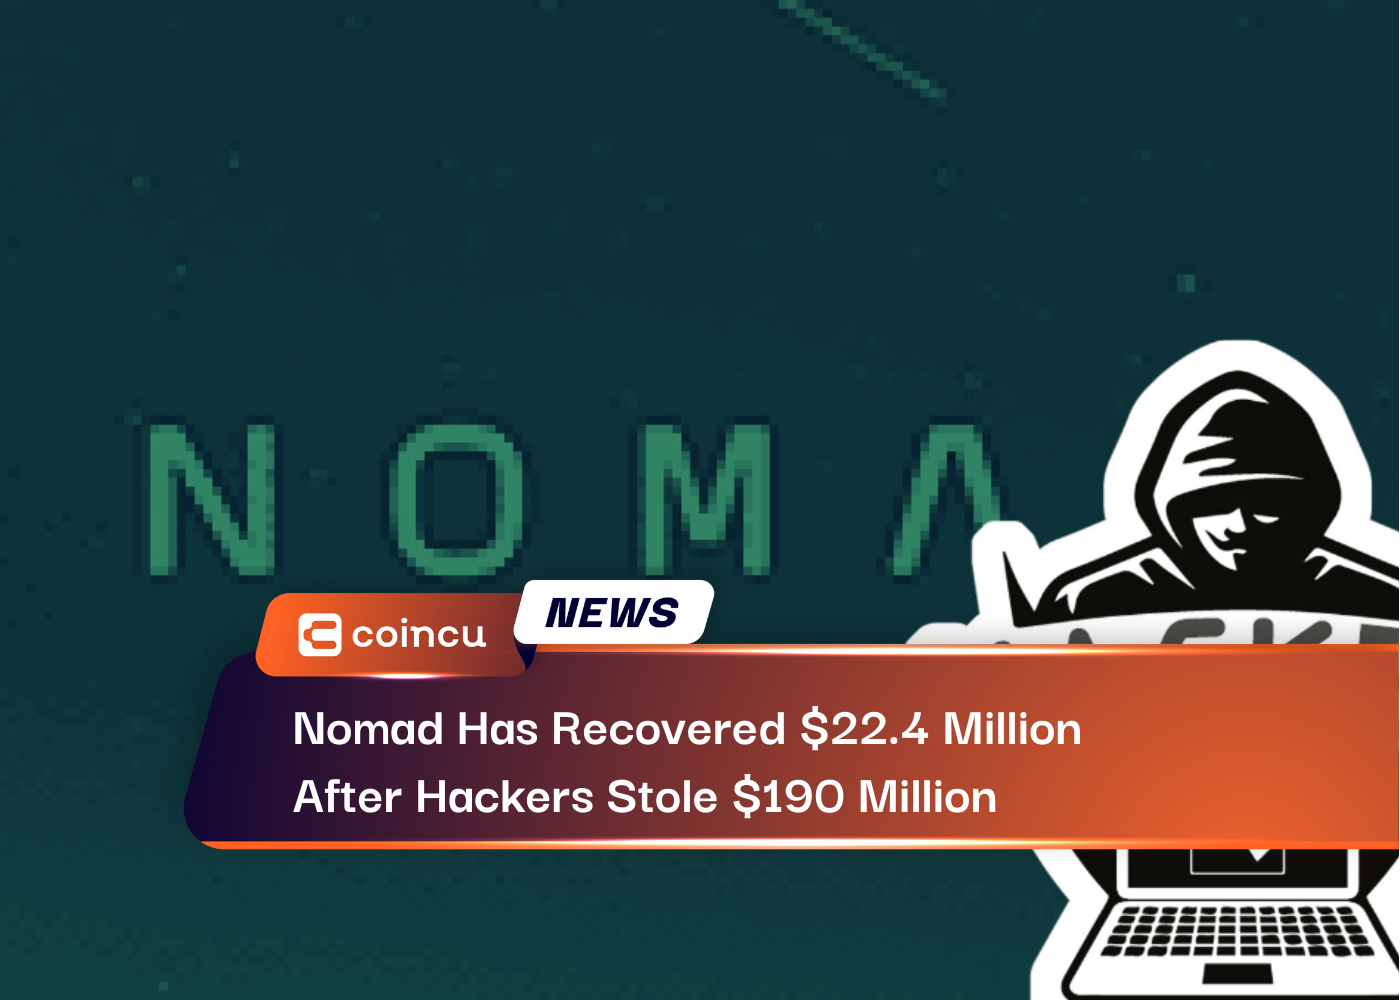 Nomad Has Recovered 22.4 Million